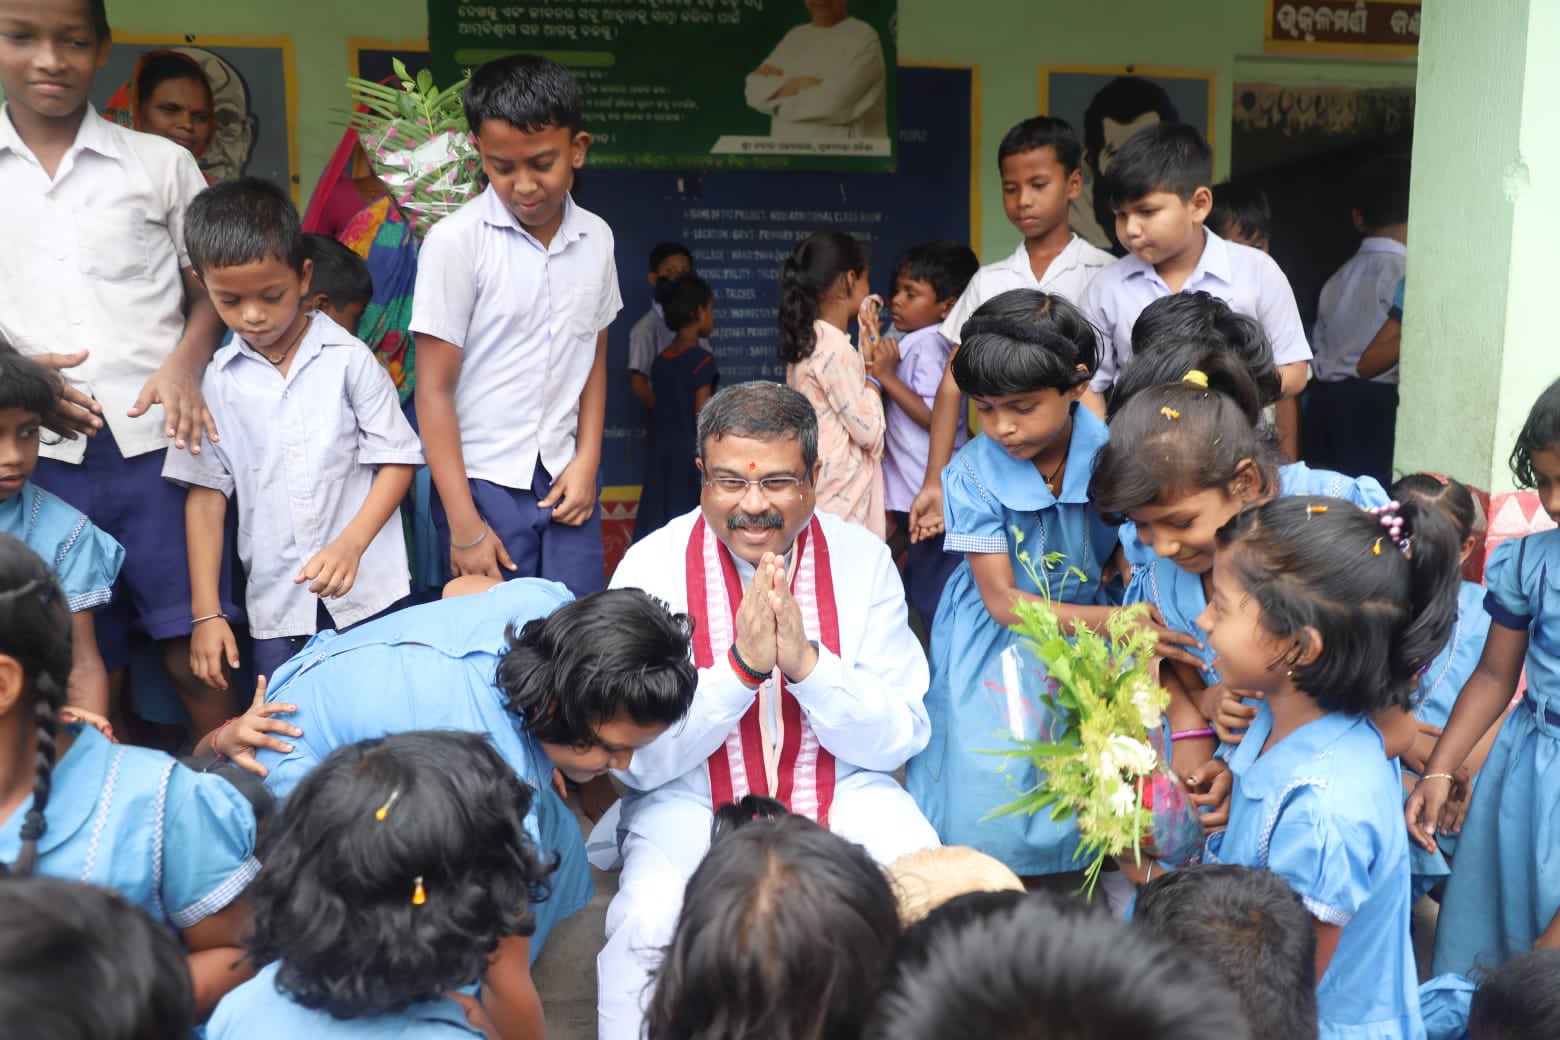 Union Education Minister Dharmendra Pradhan revisits childhood school and shares nostalgic moments